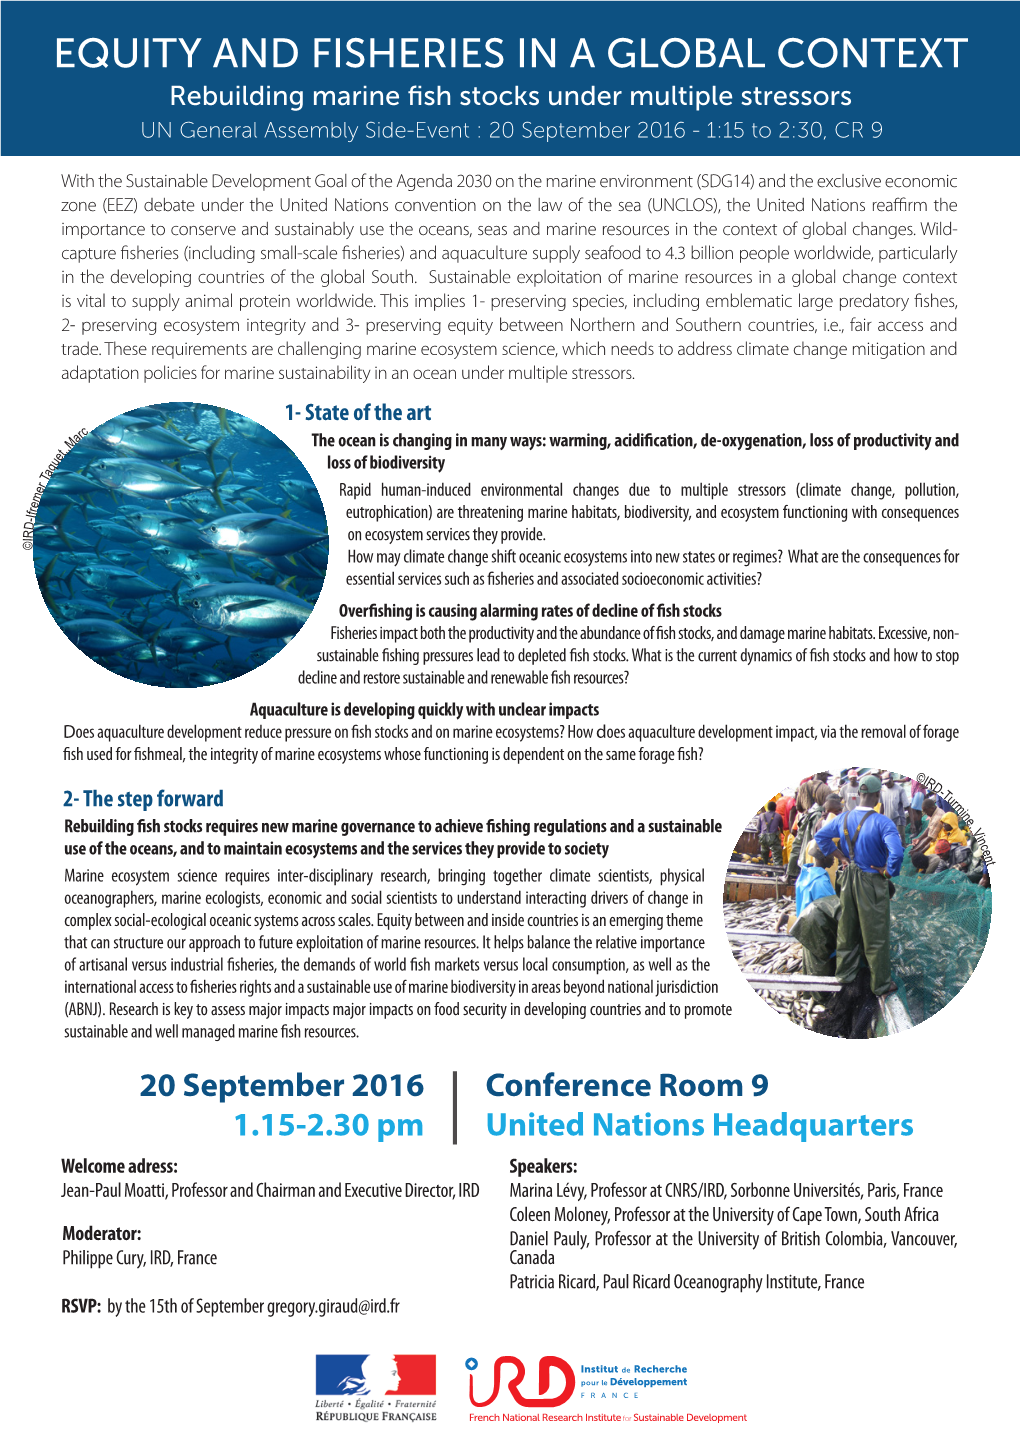 Equity and Fisheries in a Global Context